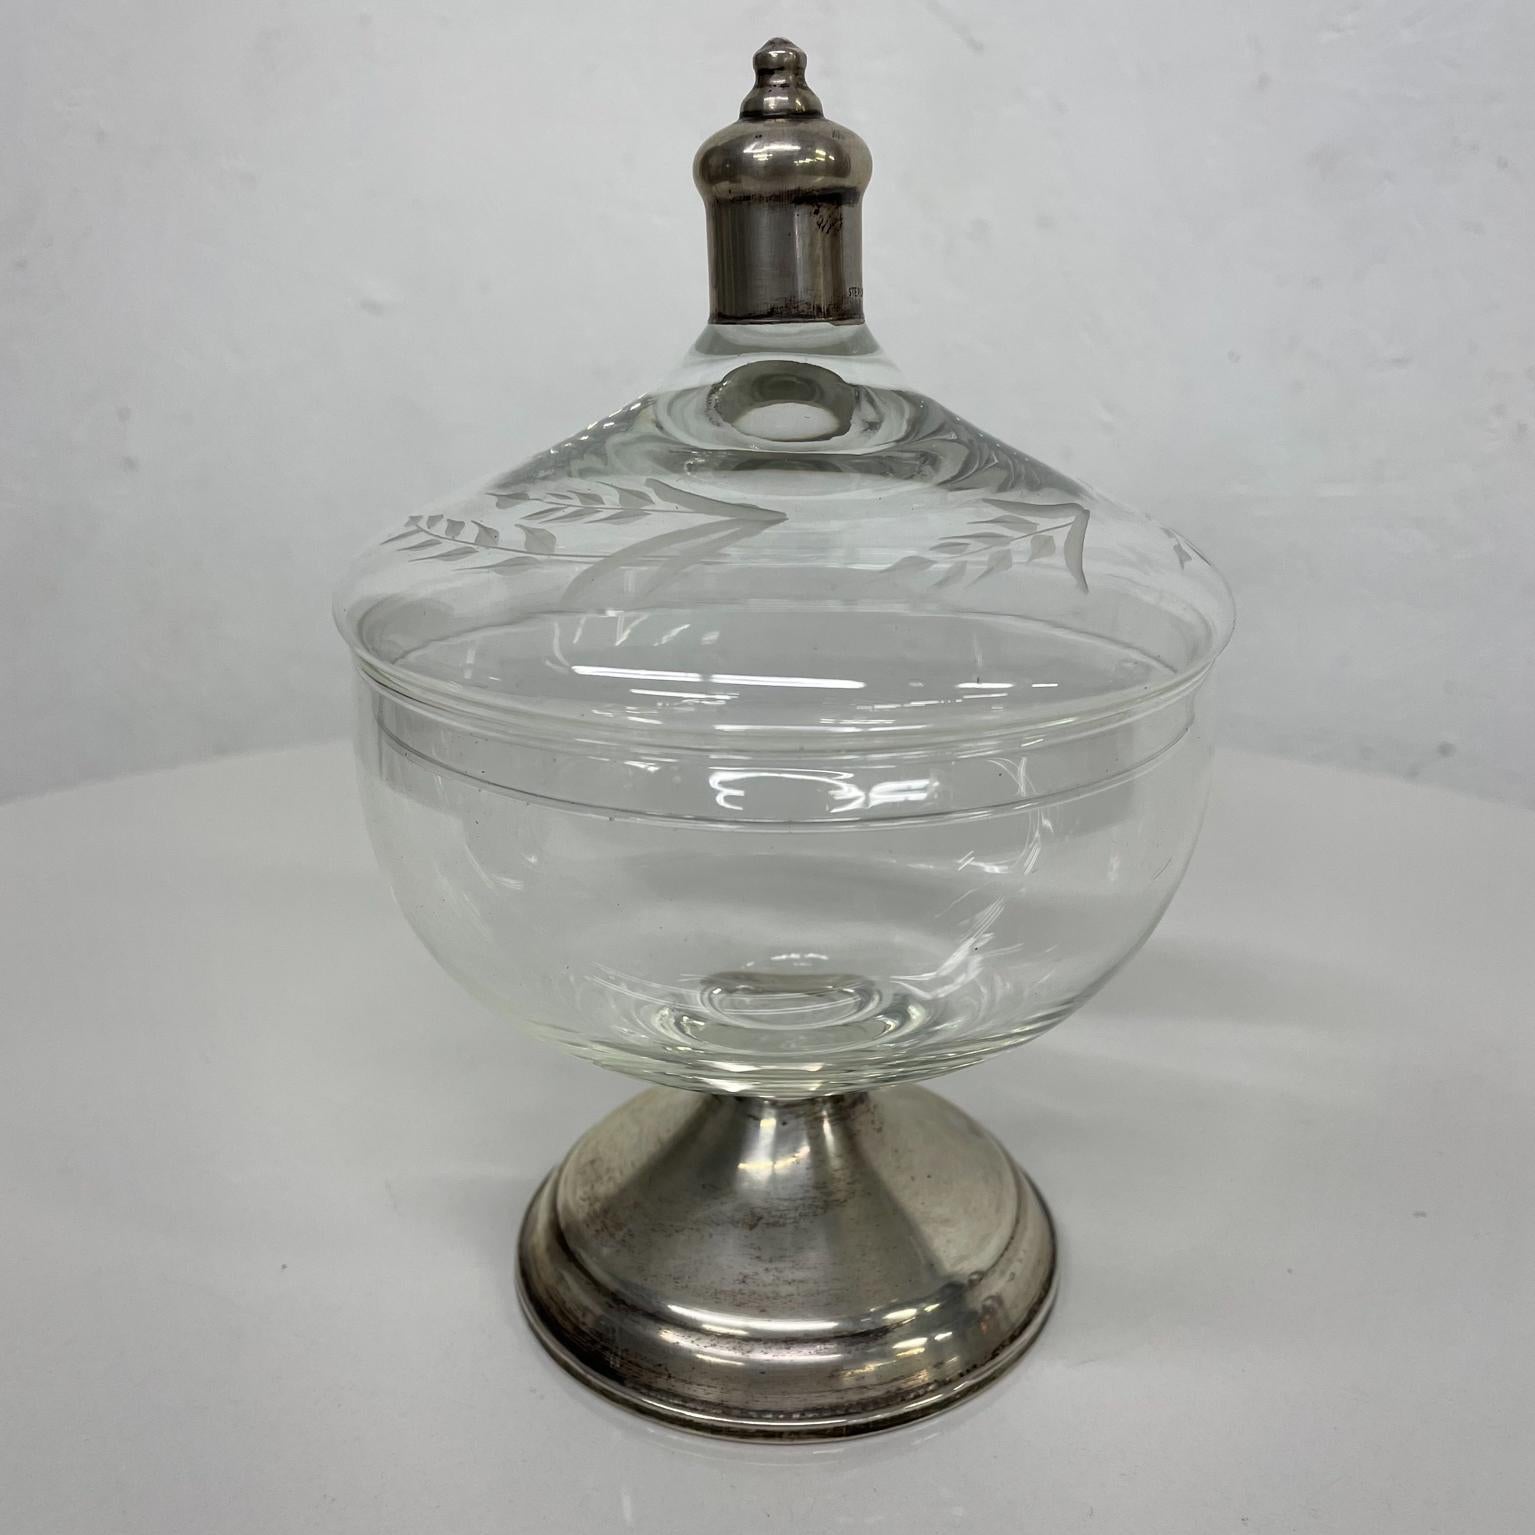 Delightful old time Duchin Creation sterling silver and etched glass covered candy dish by Maurice Duchin New York
Measures: 6.75 height x 4.5 diameter inches.
Maker stamped.
Preowned unrestored good vintage condition. Patina present.
Refer to